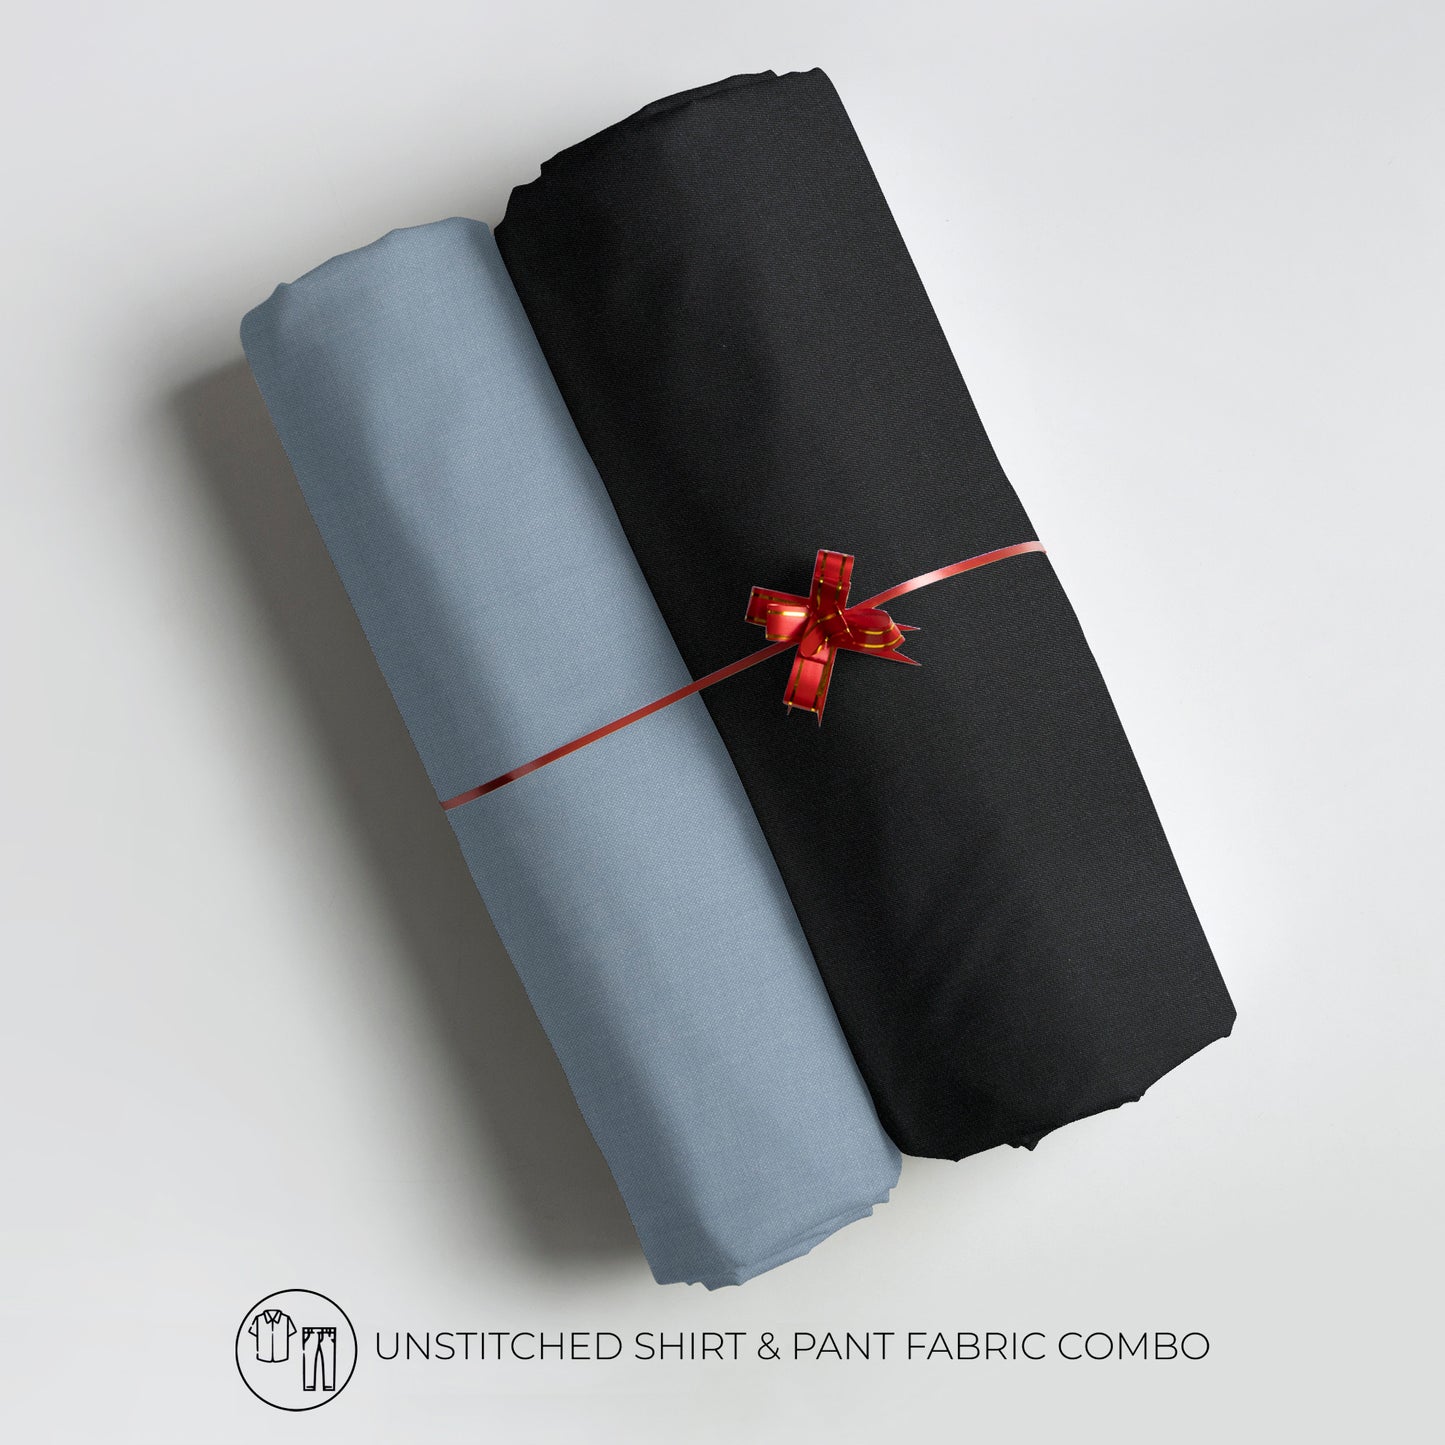 Men's Unstitched Shirt And Pant Fabric Combo In Gift Carrying Case